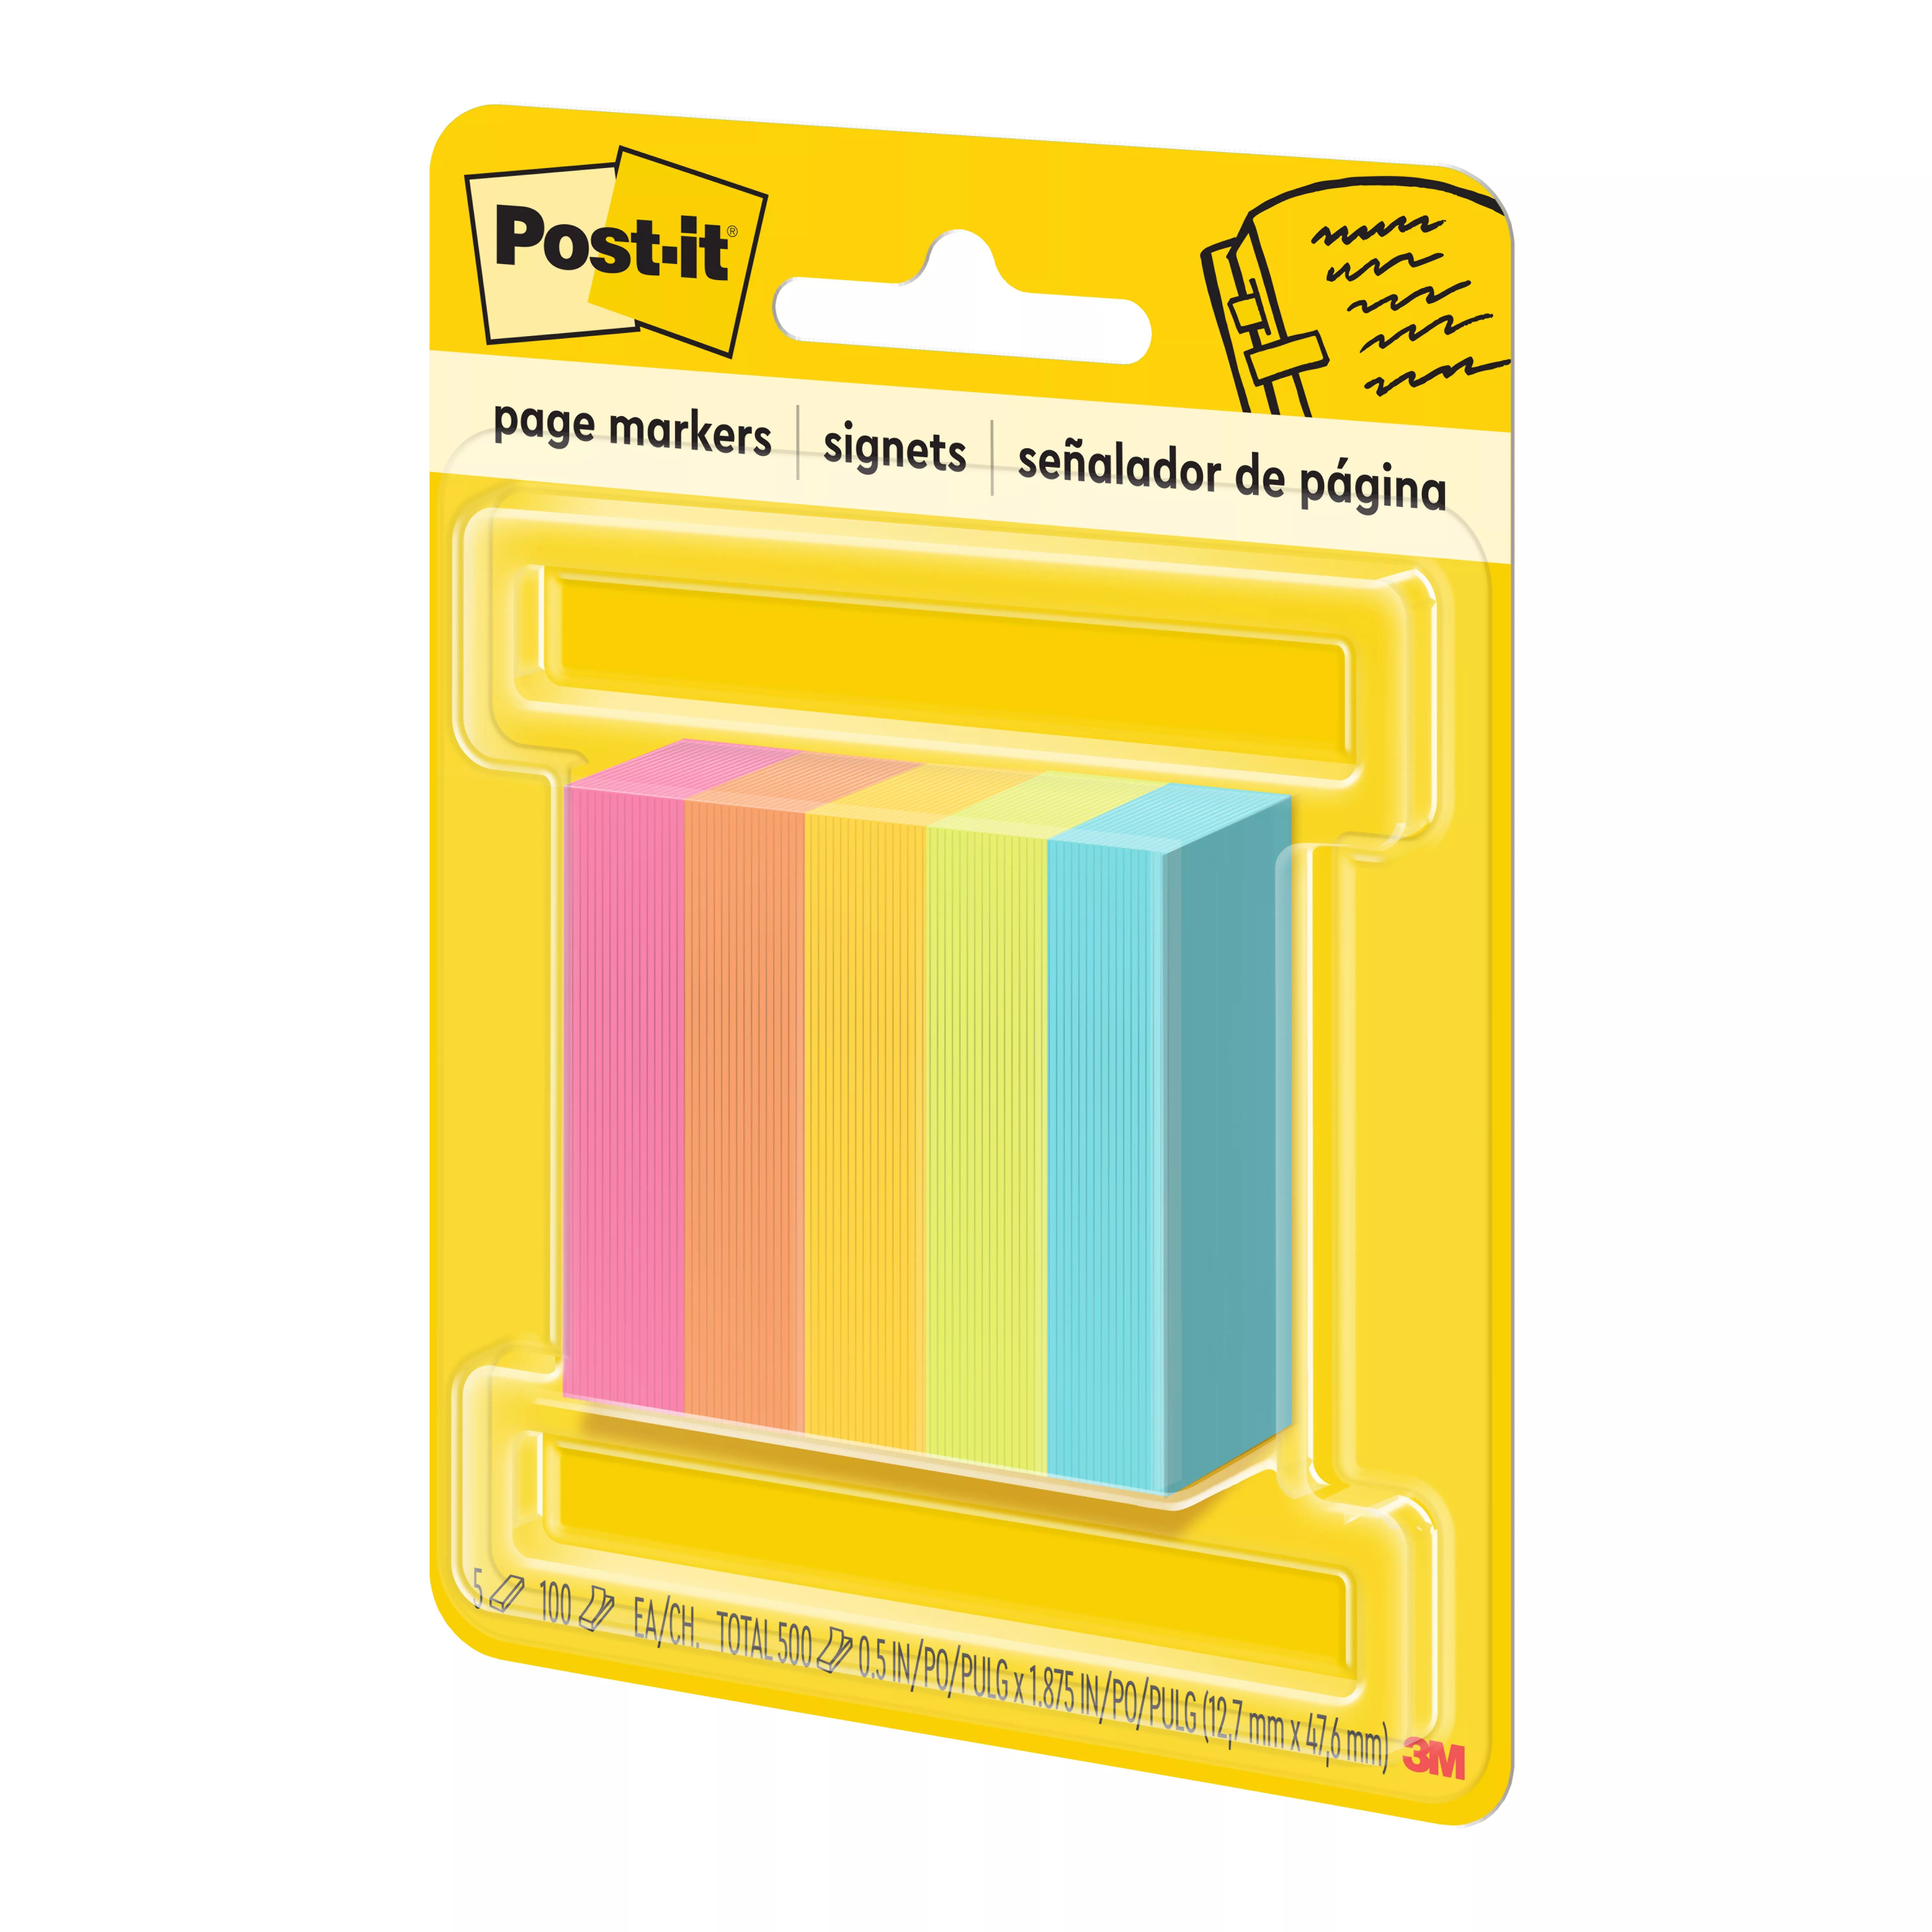 UPC 00021200588495 | Post-it® Page Markers 670-5AN